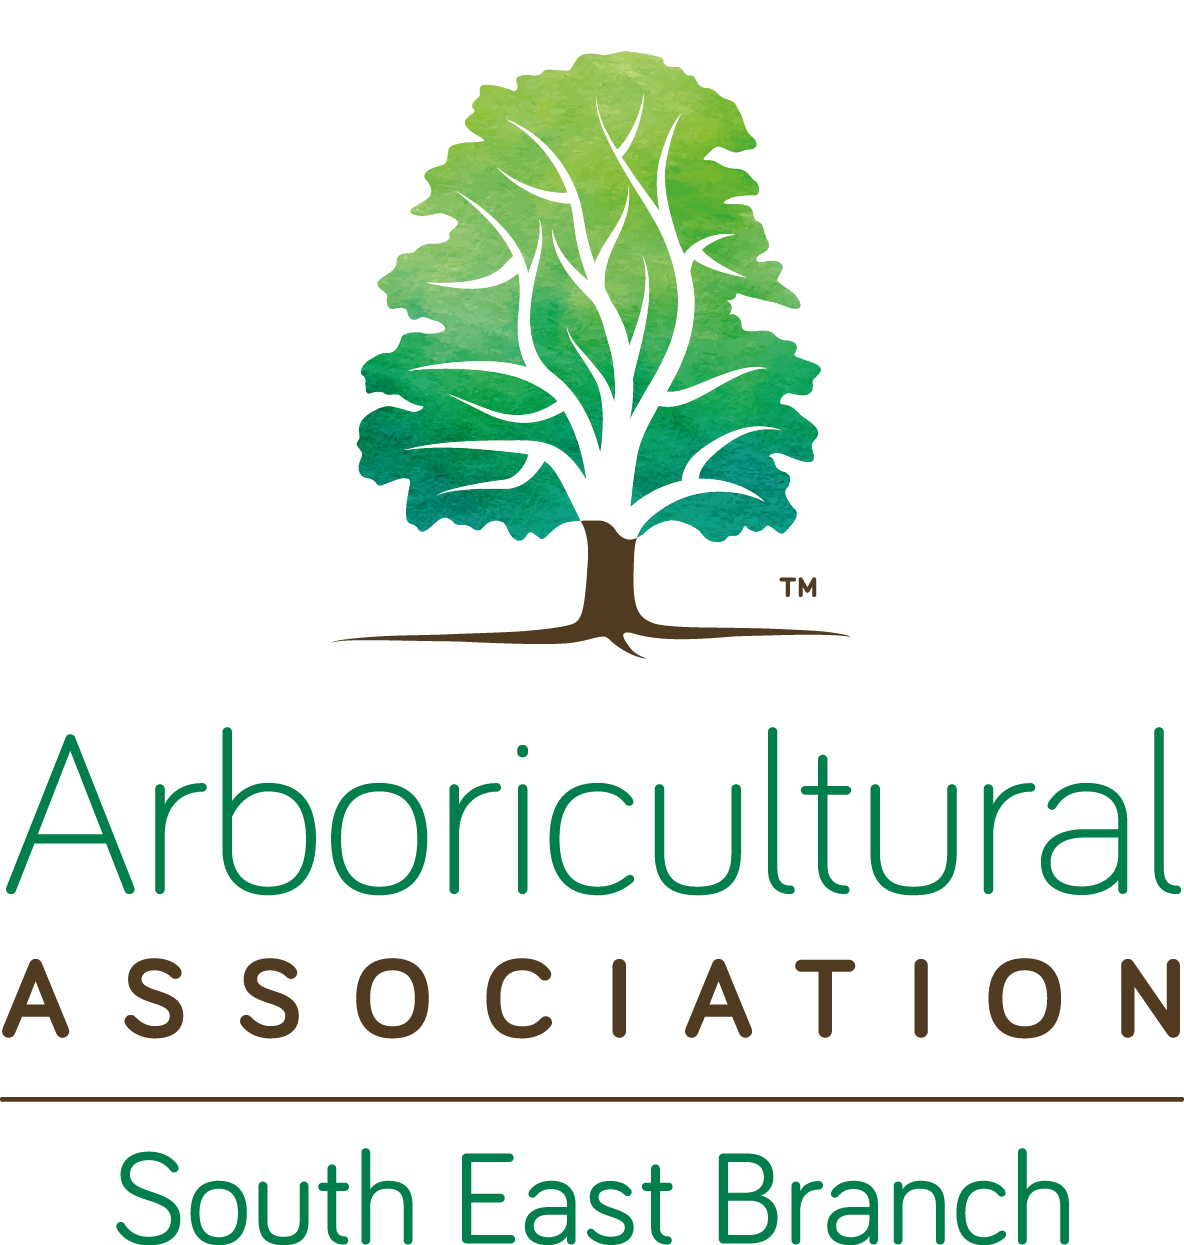 Arboricultural Association South East Branch